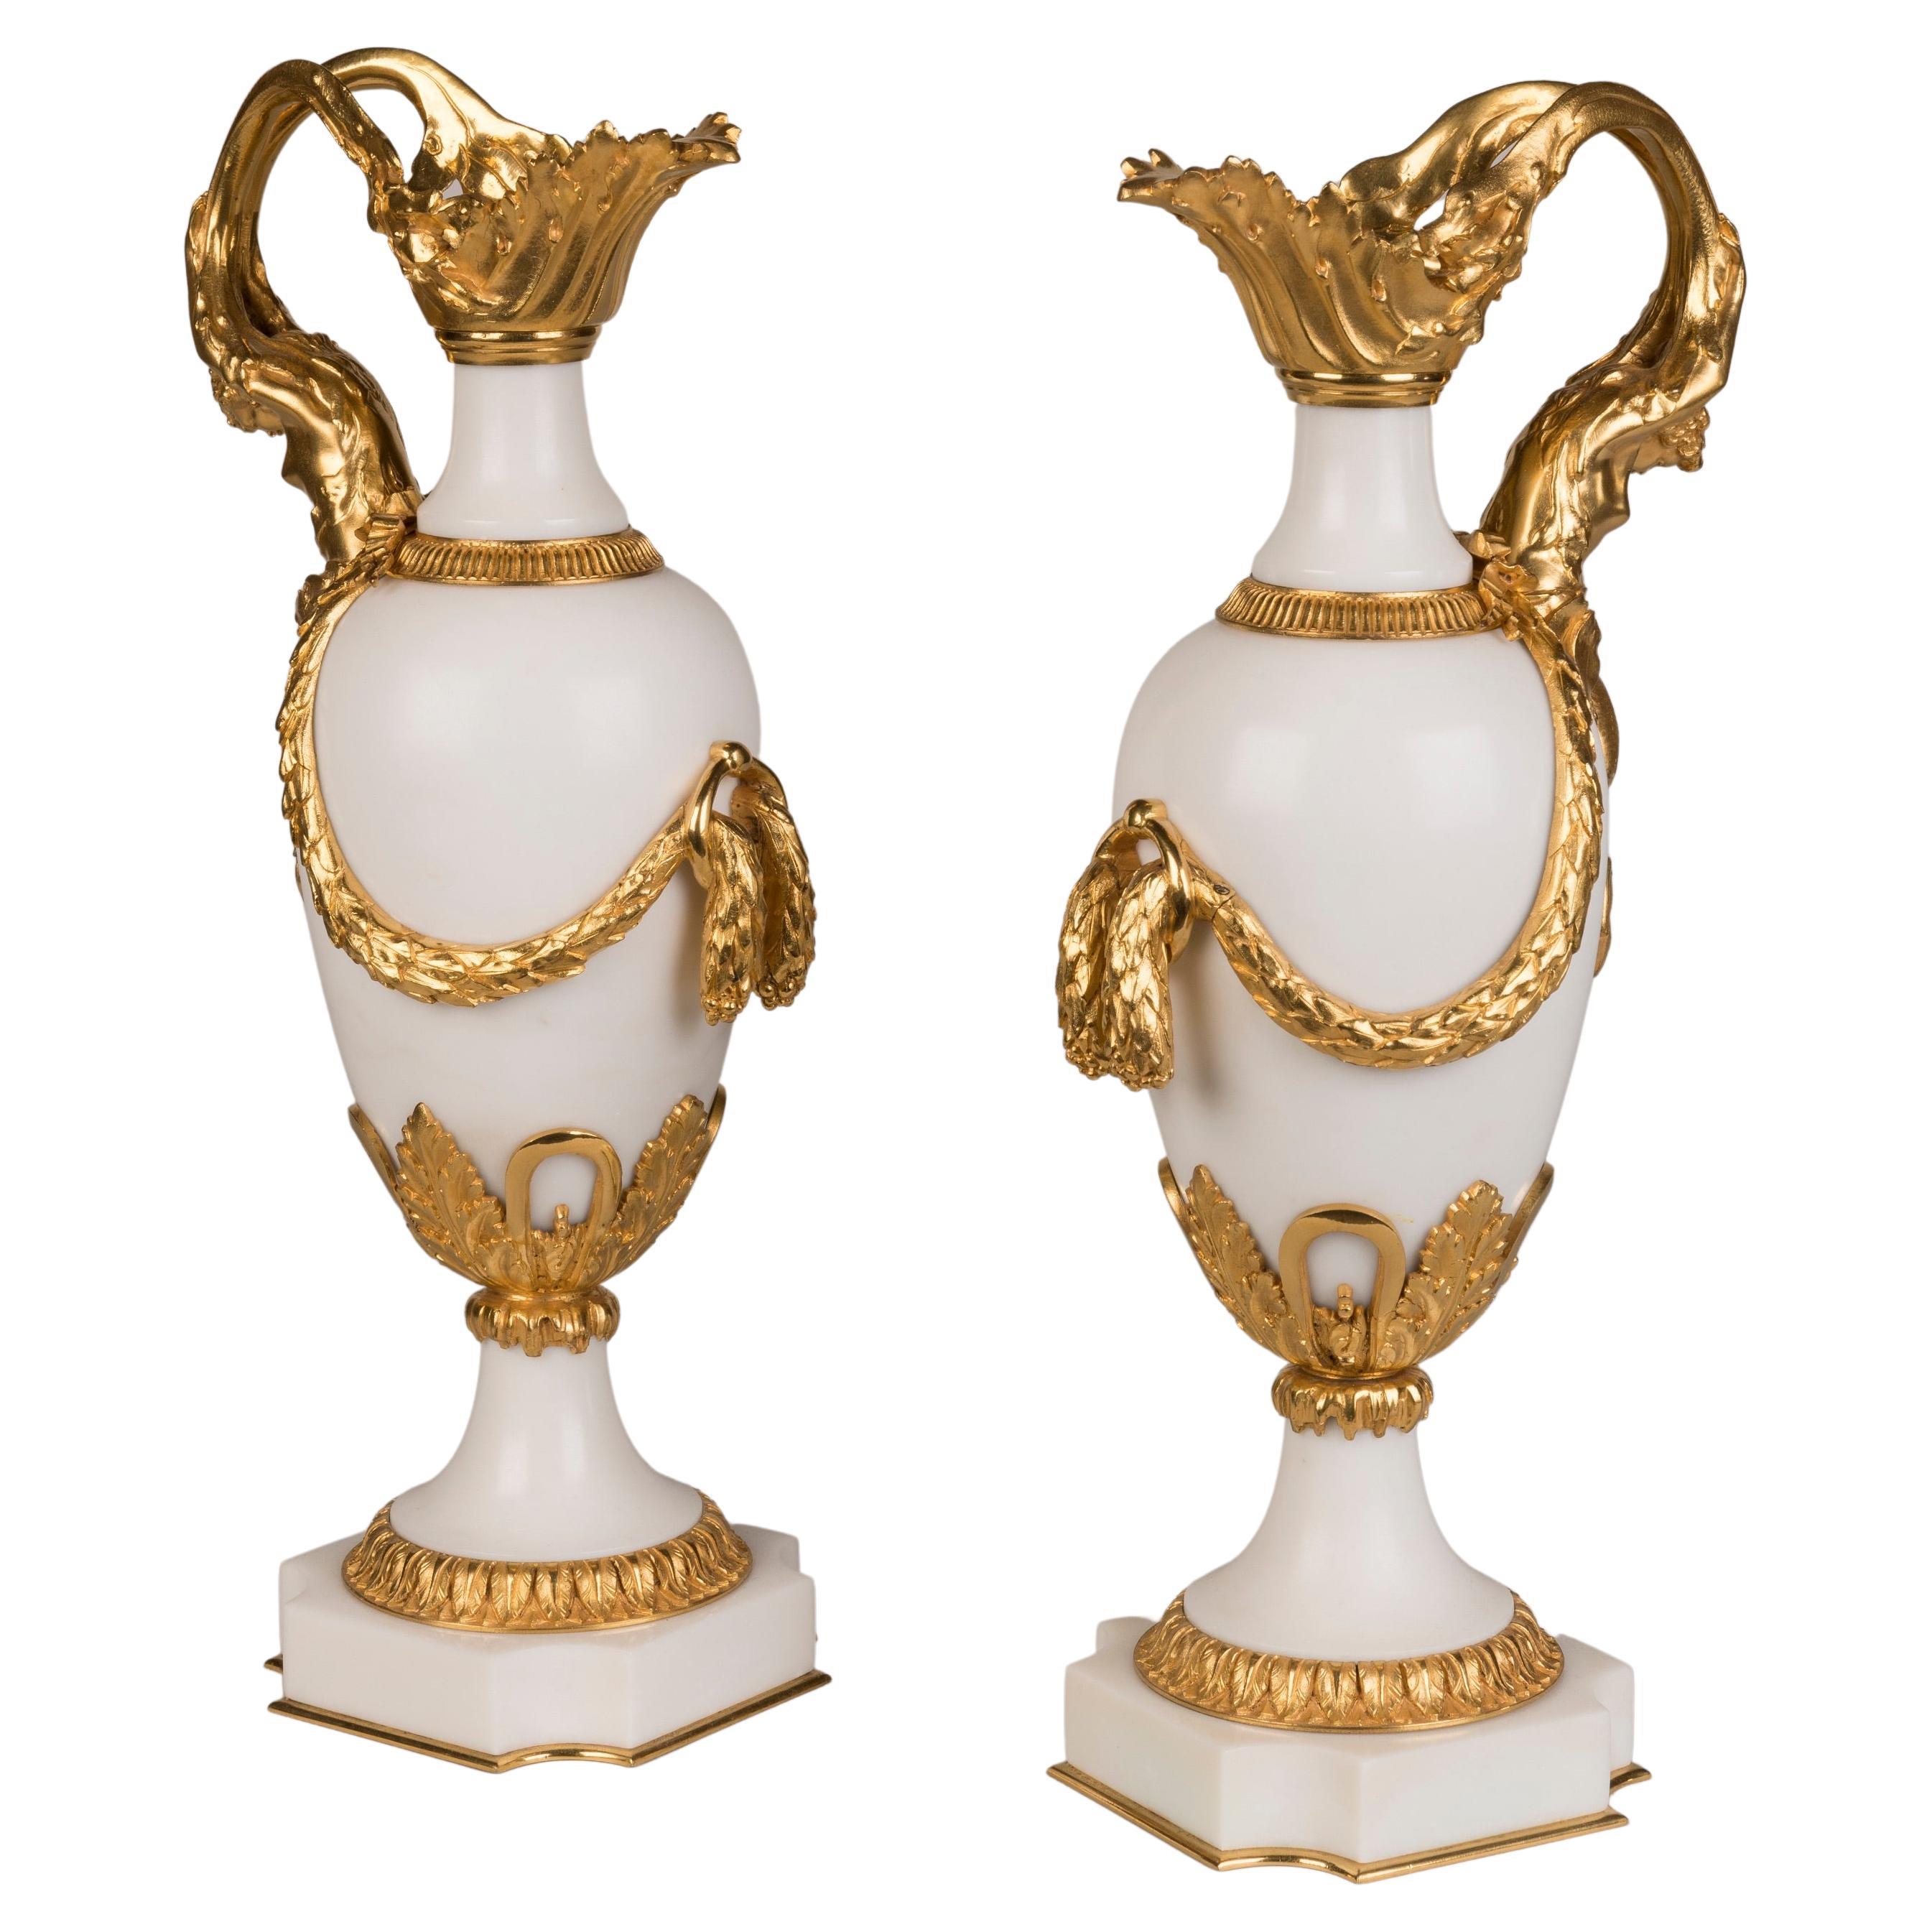 19th Century French Pair of Ormolu-Mounted Carrara Marble Vases For Sale